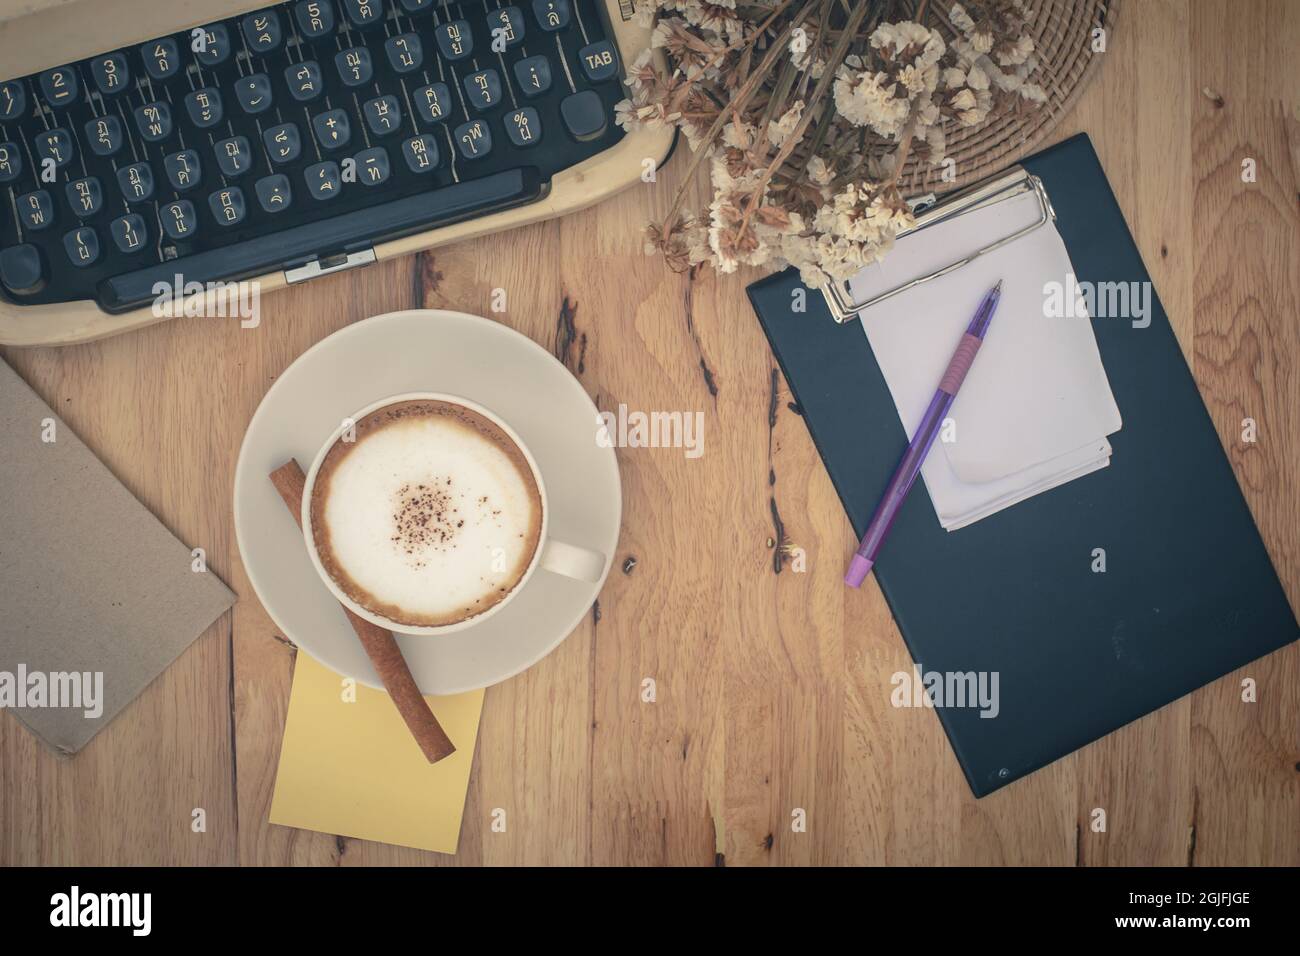 Vintage typewriters and Cup of Coffee on wooden table. Stock Photo